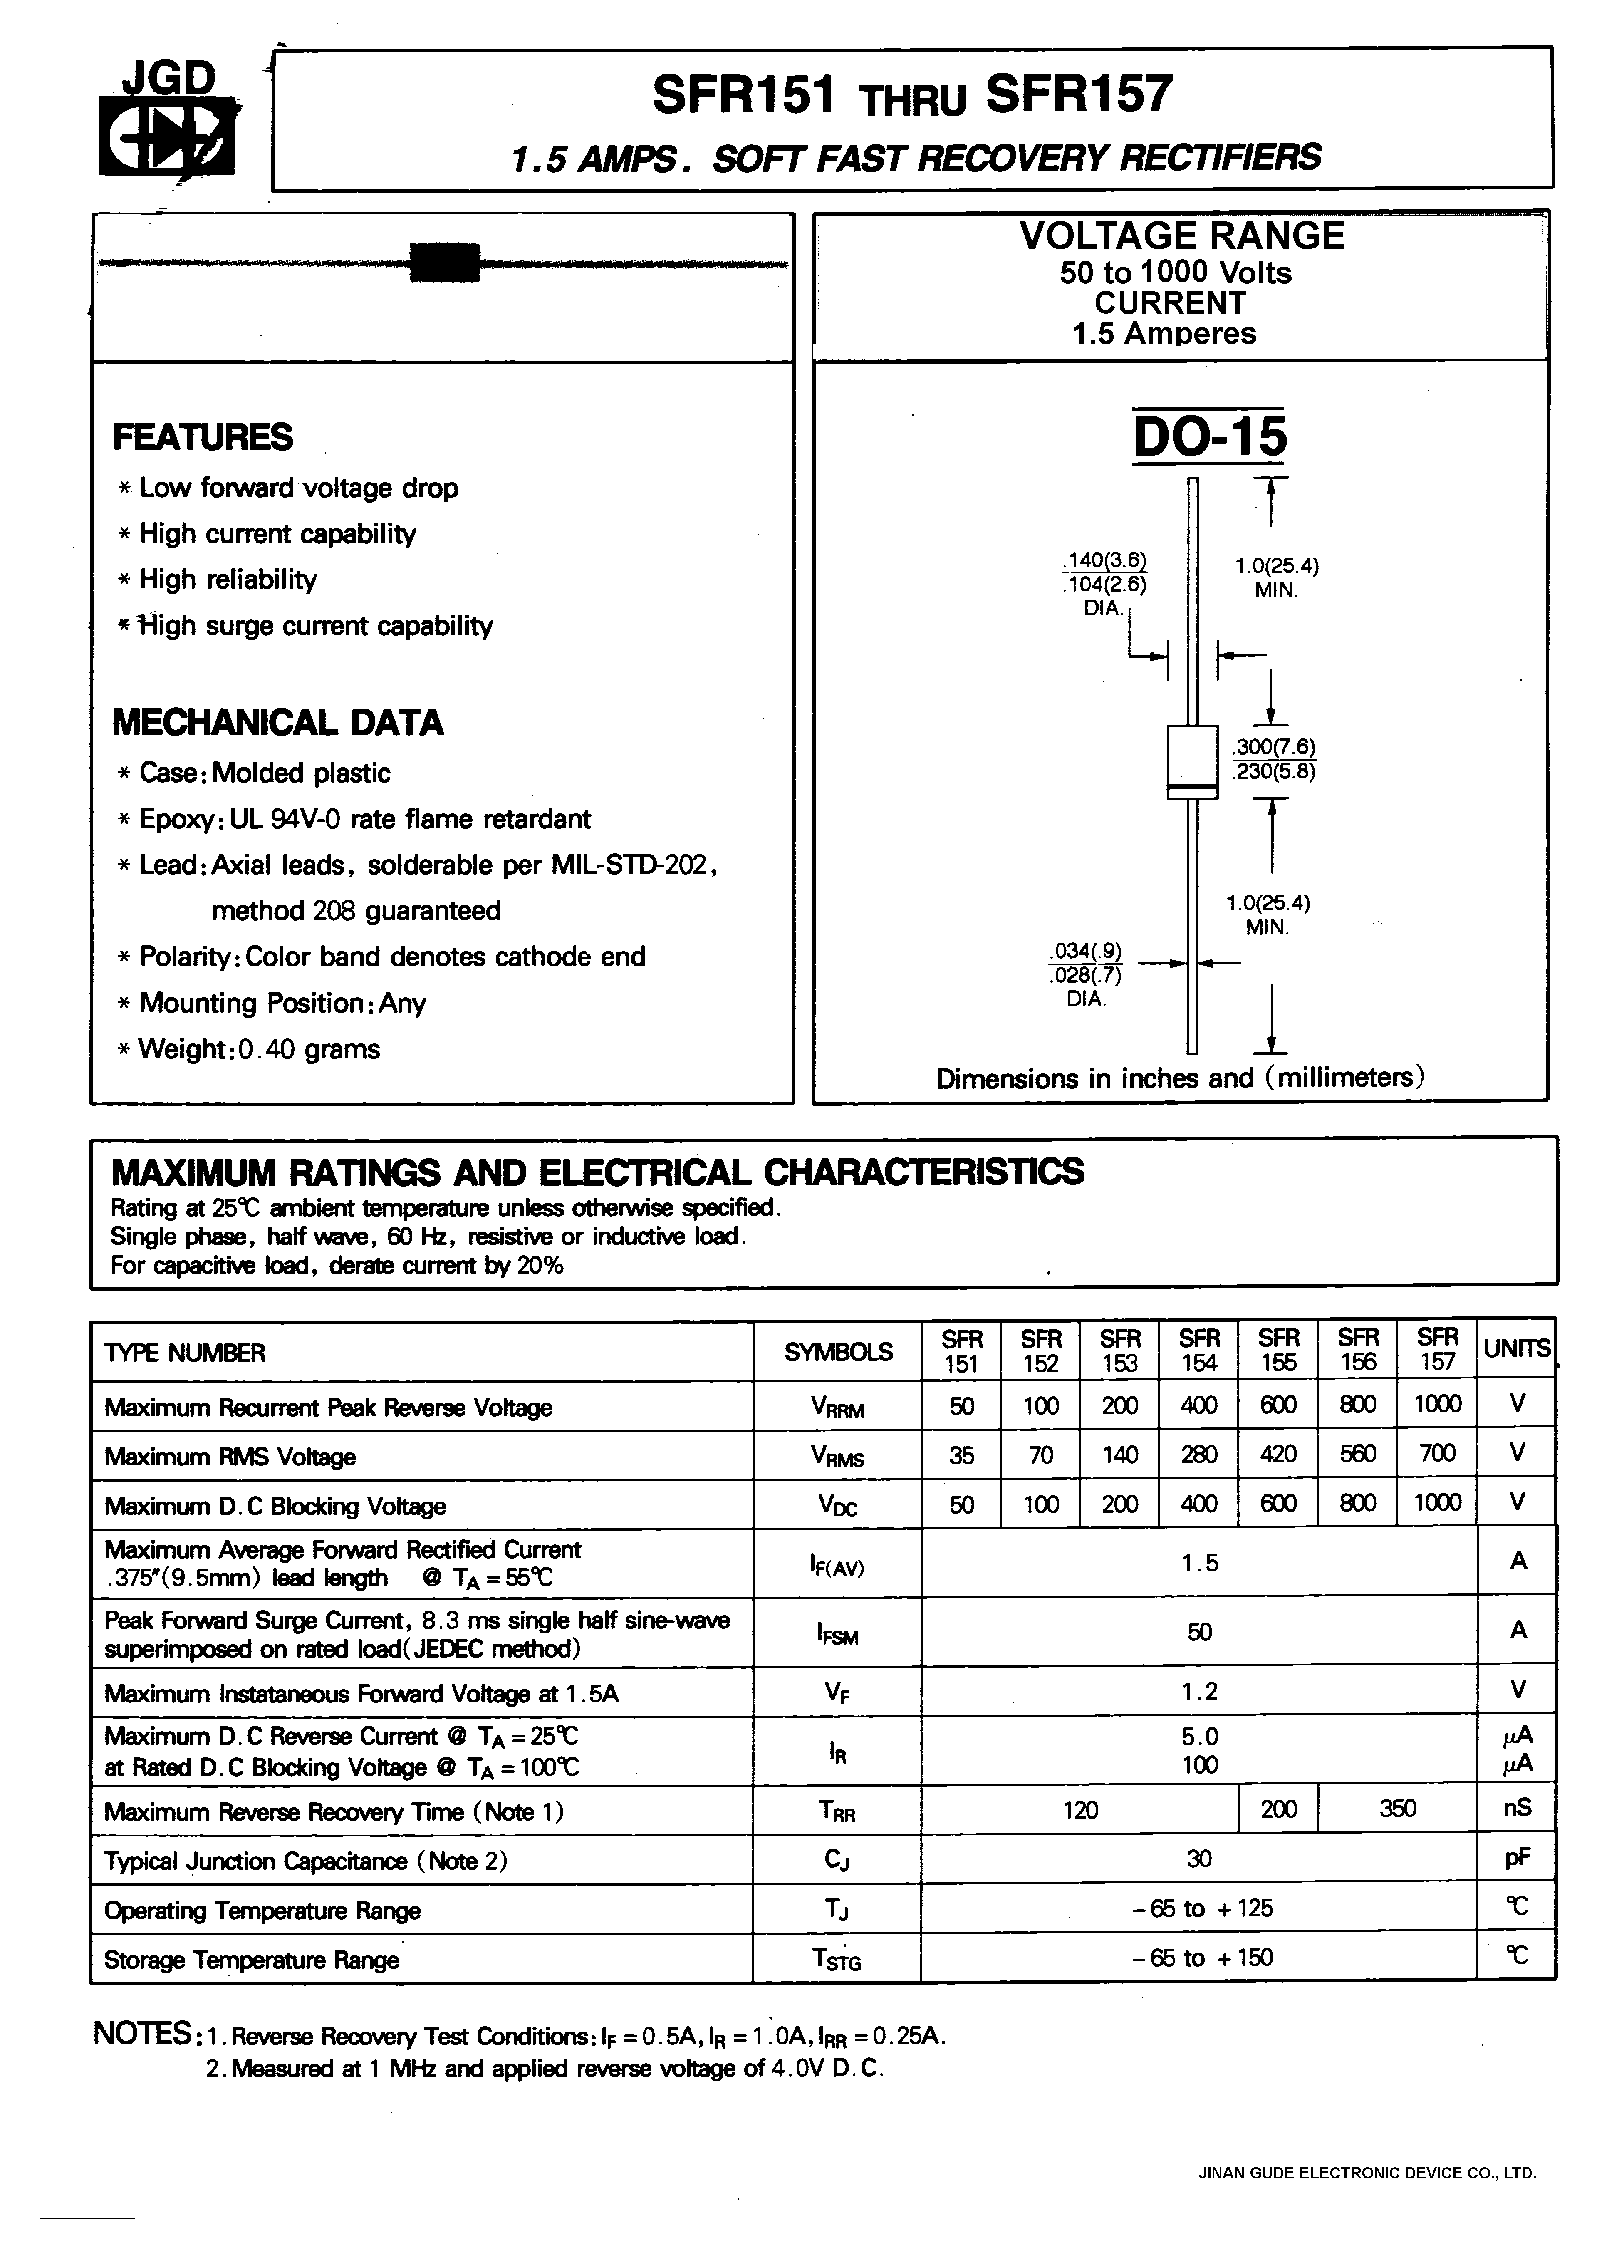 Datasheet SFR154 - 1.5 AMPS. SOFT FAST RECOVERY RECTIFIERS page 1